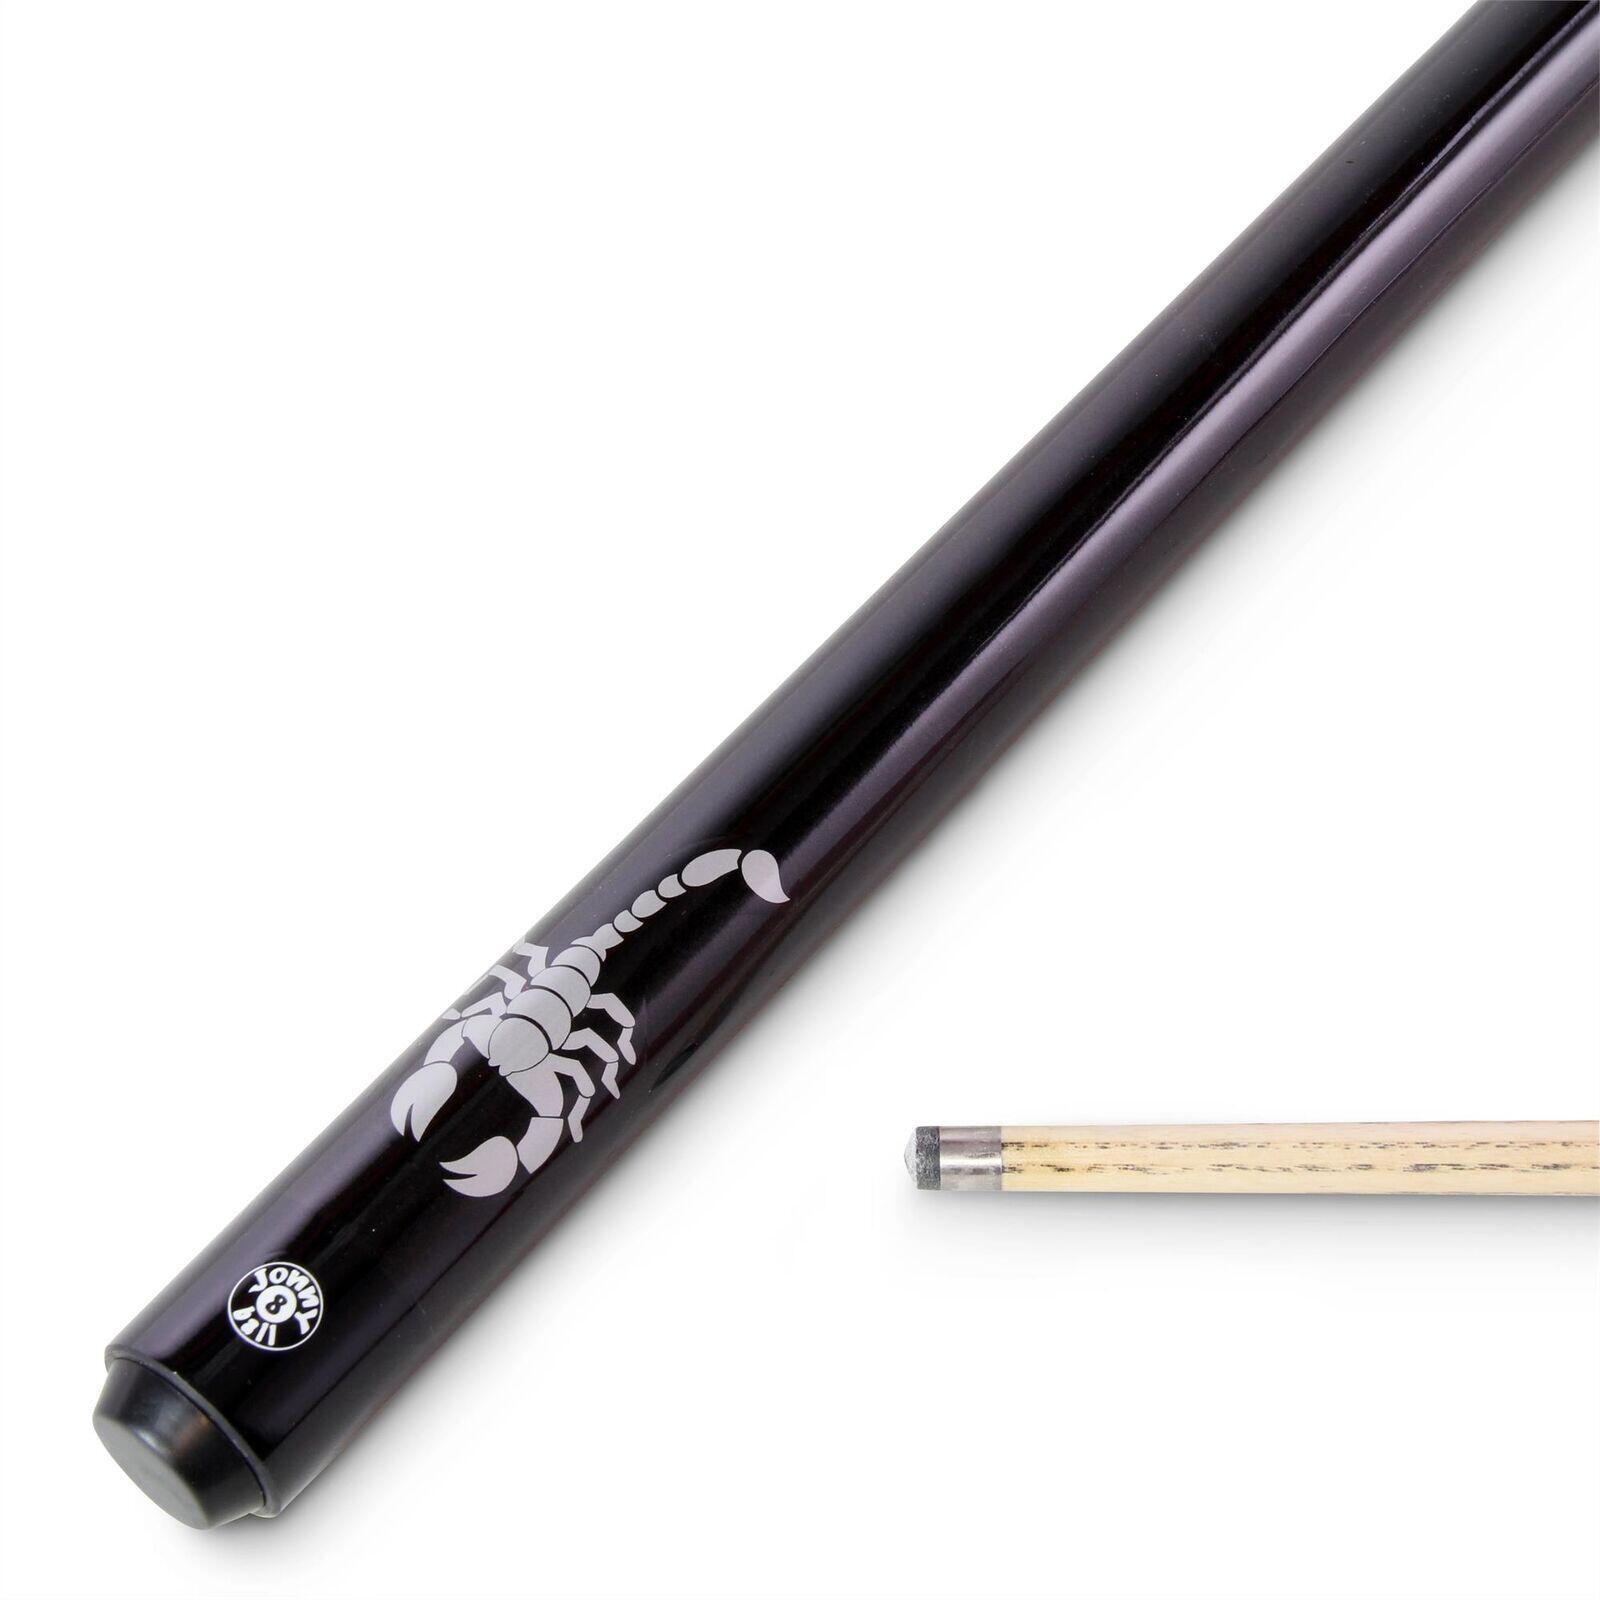 Jonny 8 Ball BLACK SCORPION 2pc Centre Joint Ash Snooker Pool Cue with 9mm Tip 2/6